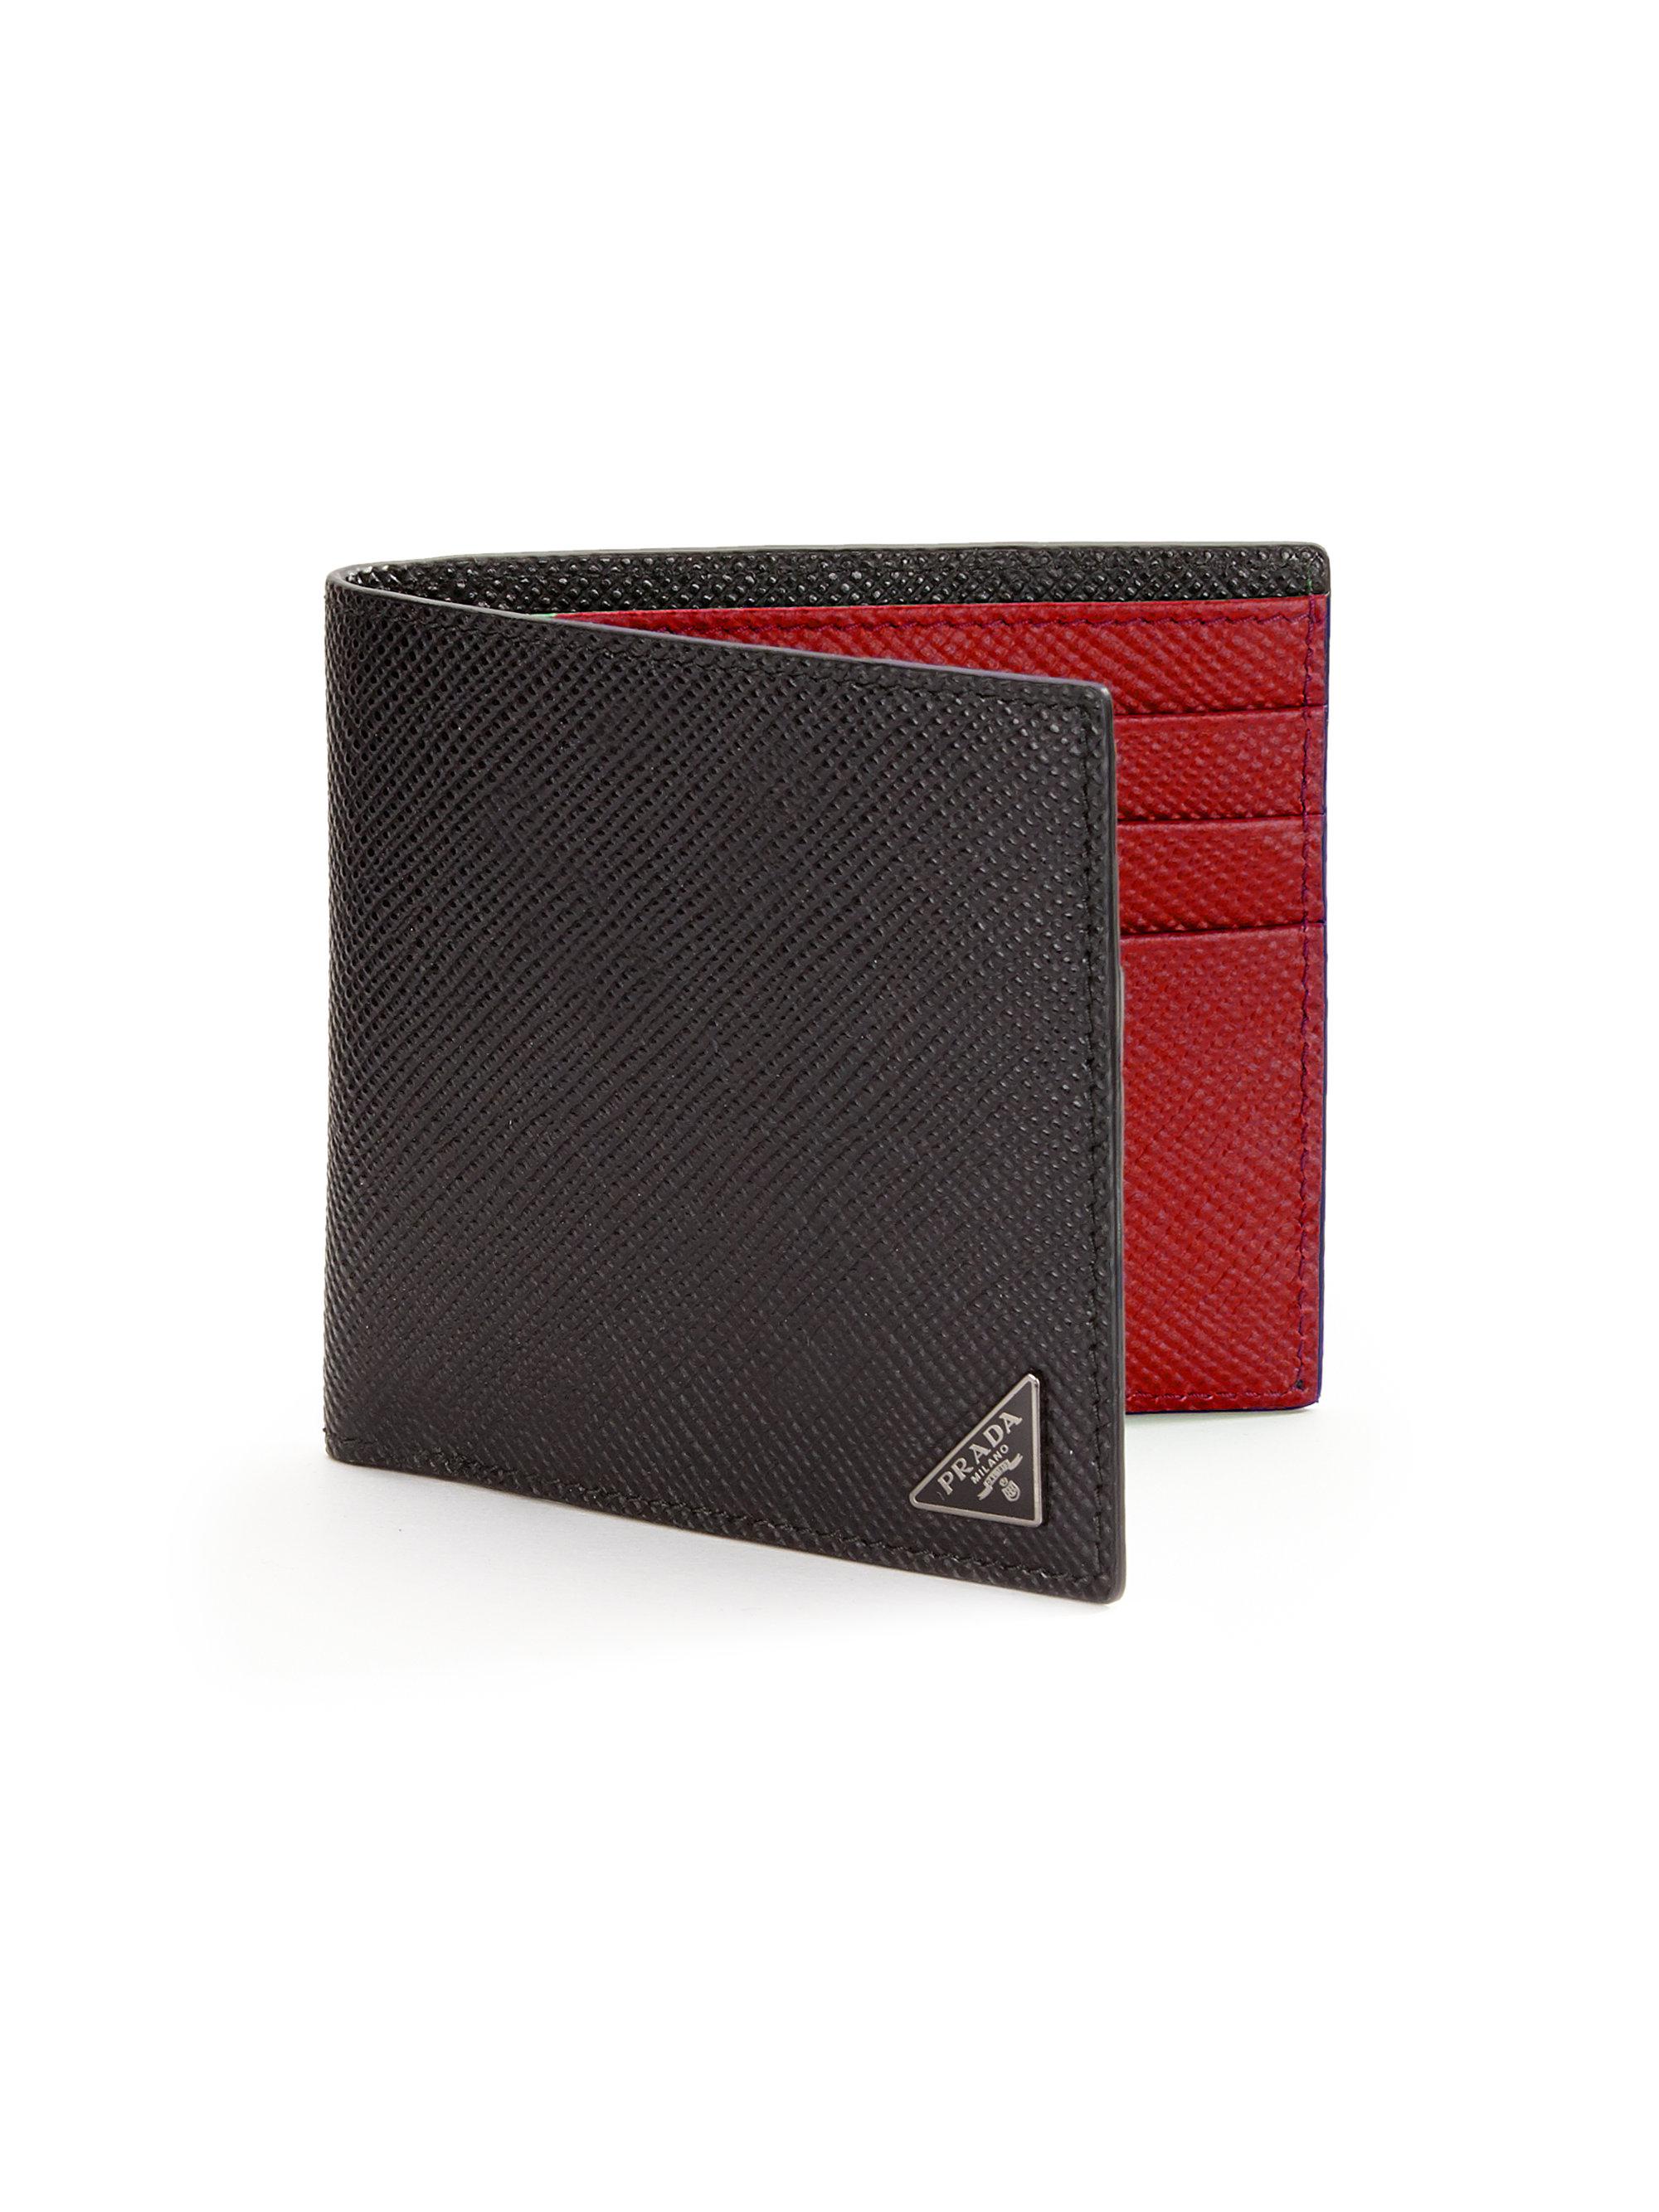 Prada Leather Orizzontale Wallet in Black Red (Black) for Men | Lyst